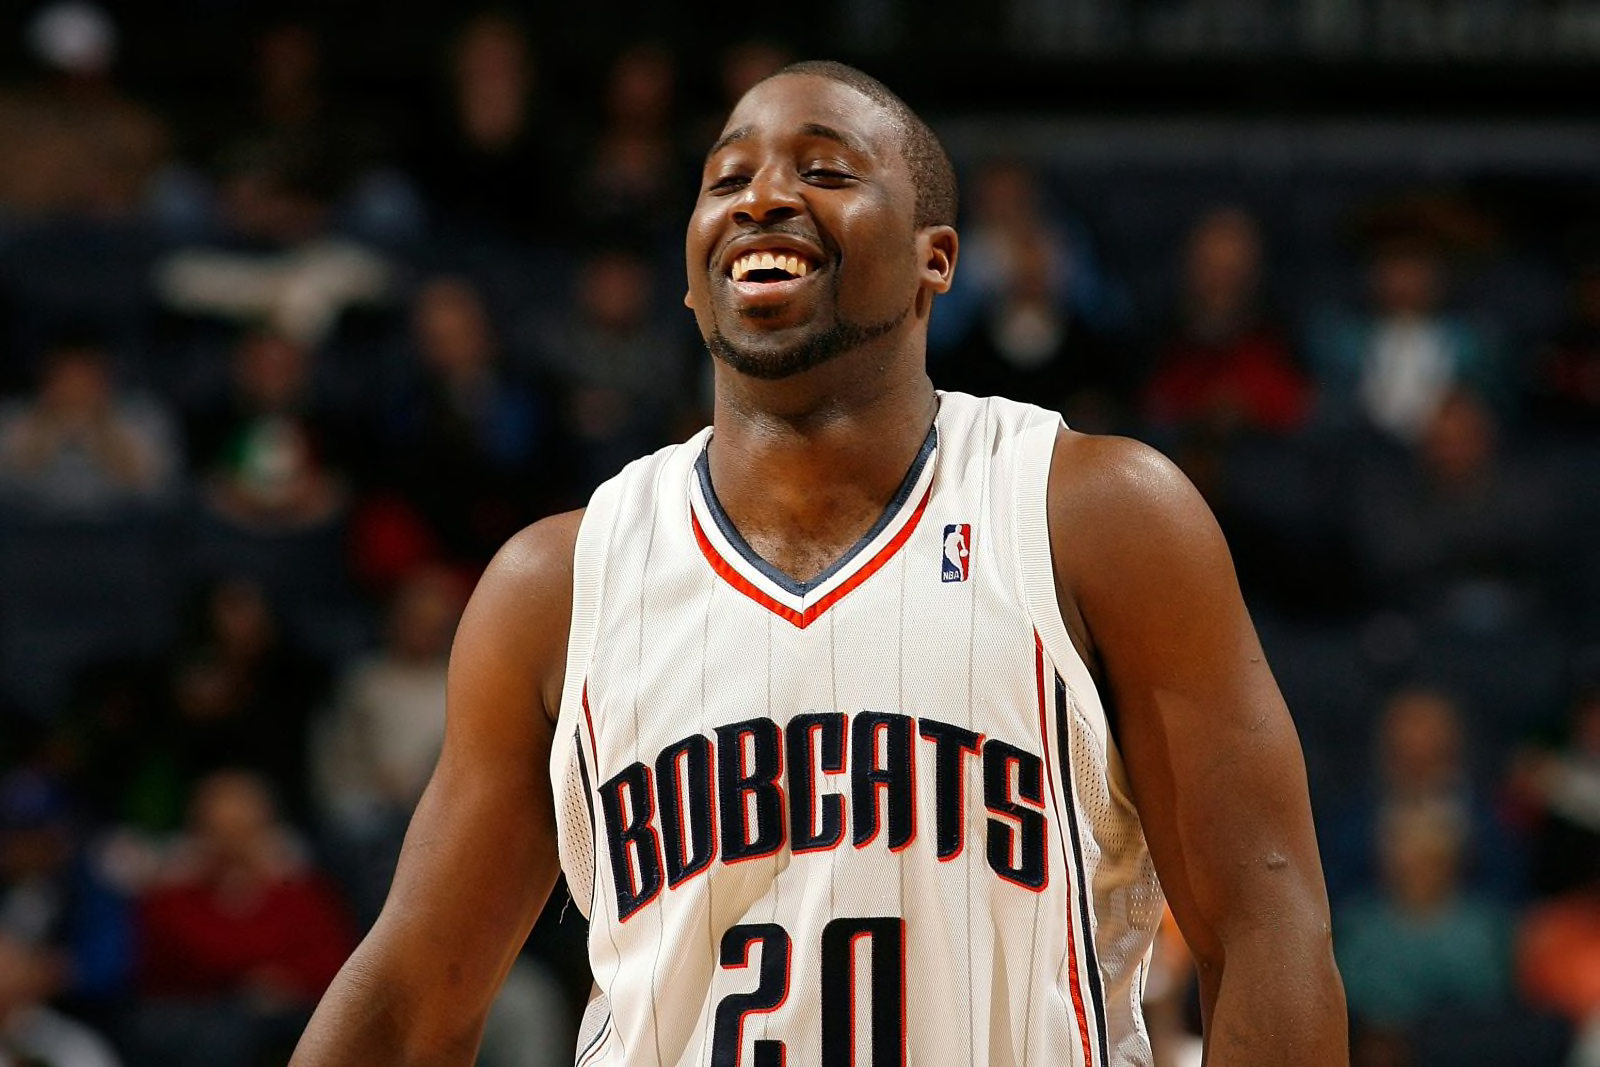 Raymond Felton drafted by the Charlotte Bobcats in 2005